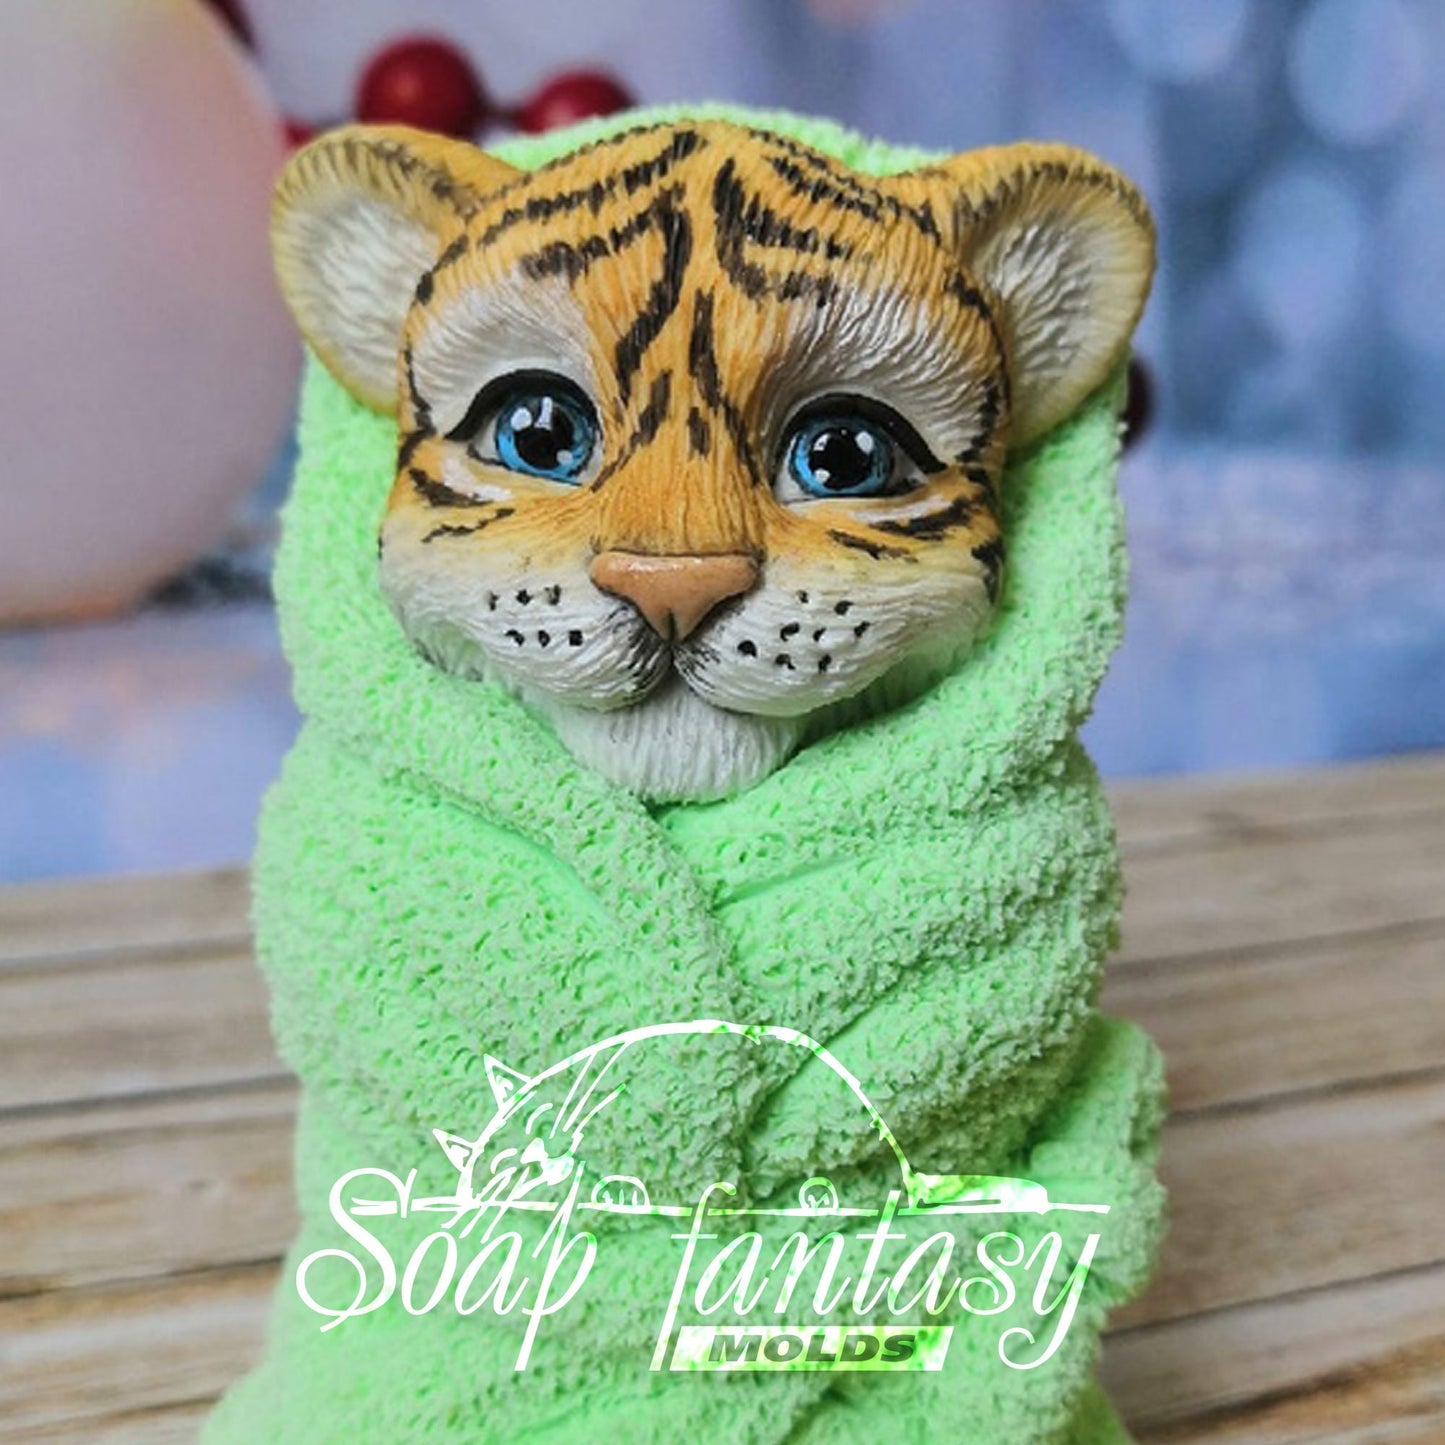 Tiger Cub in a towel silicone mold for soap making